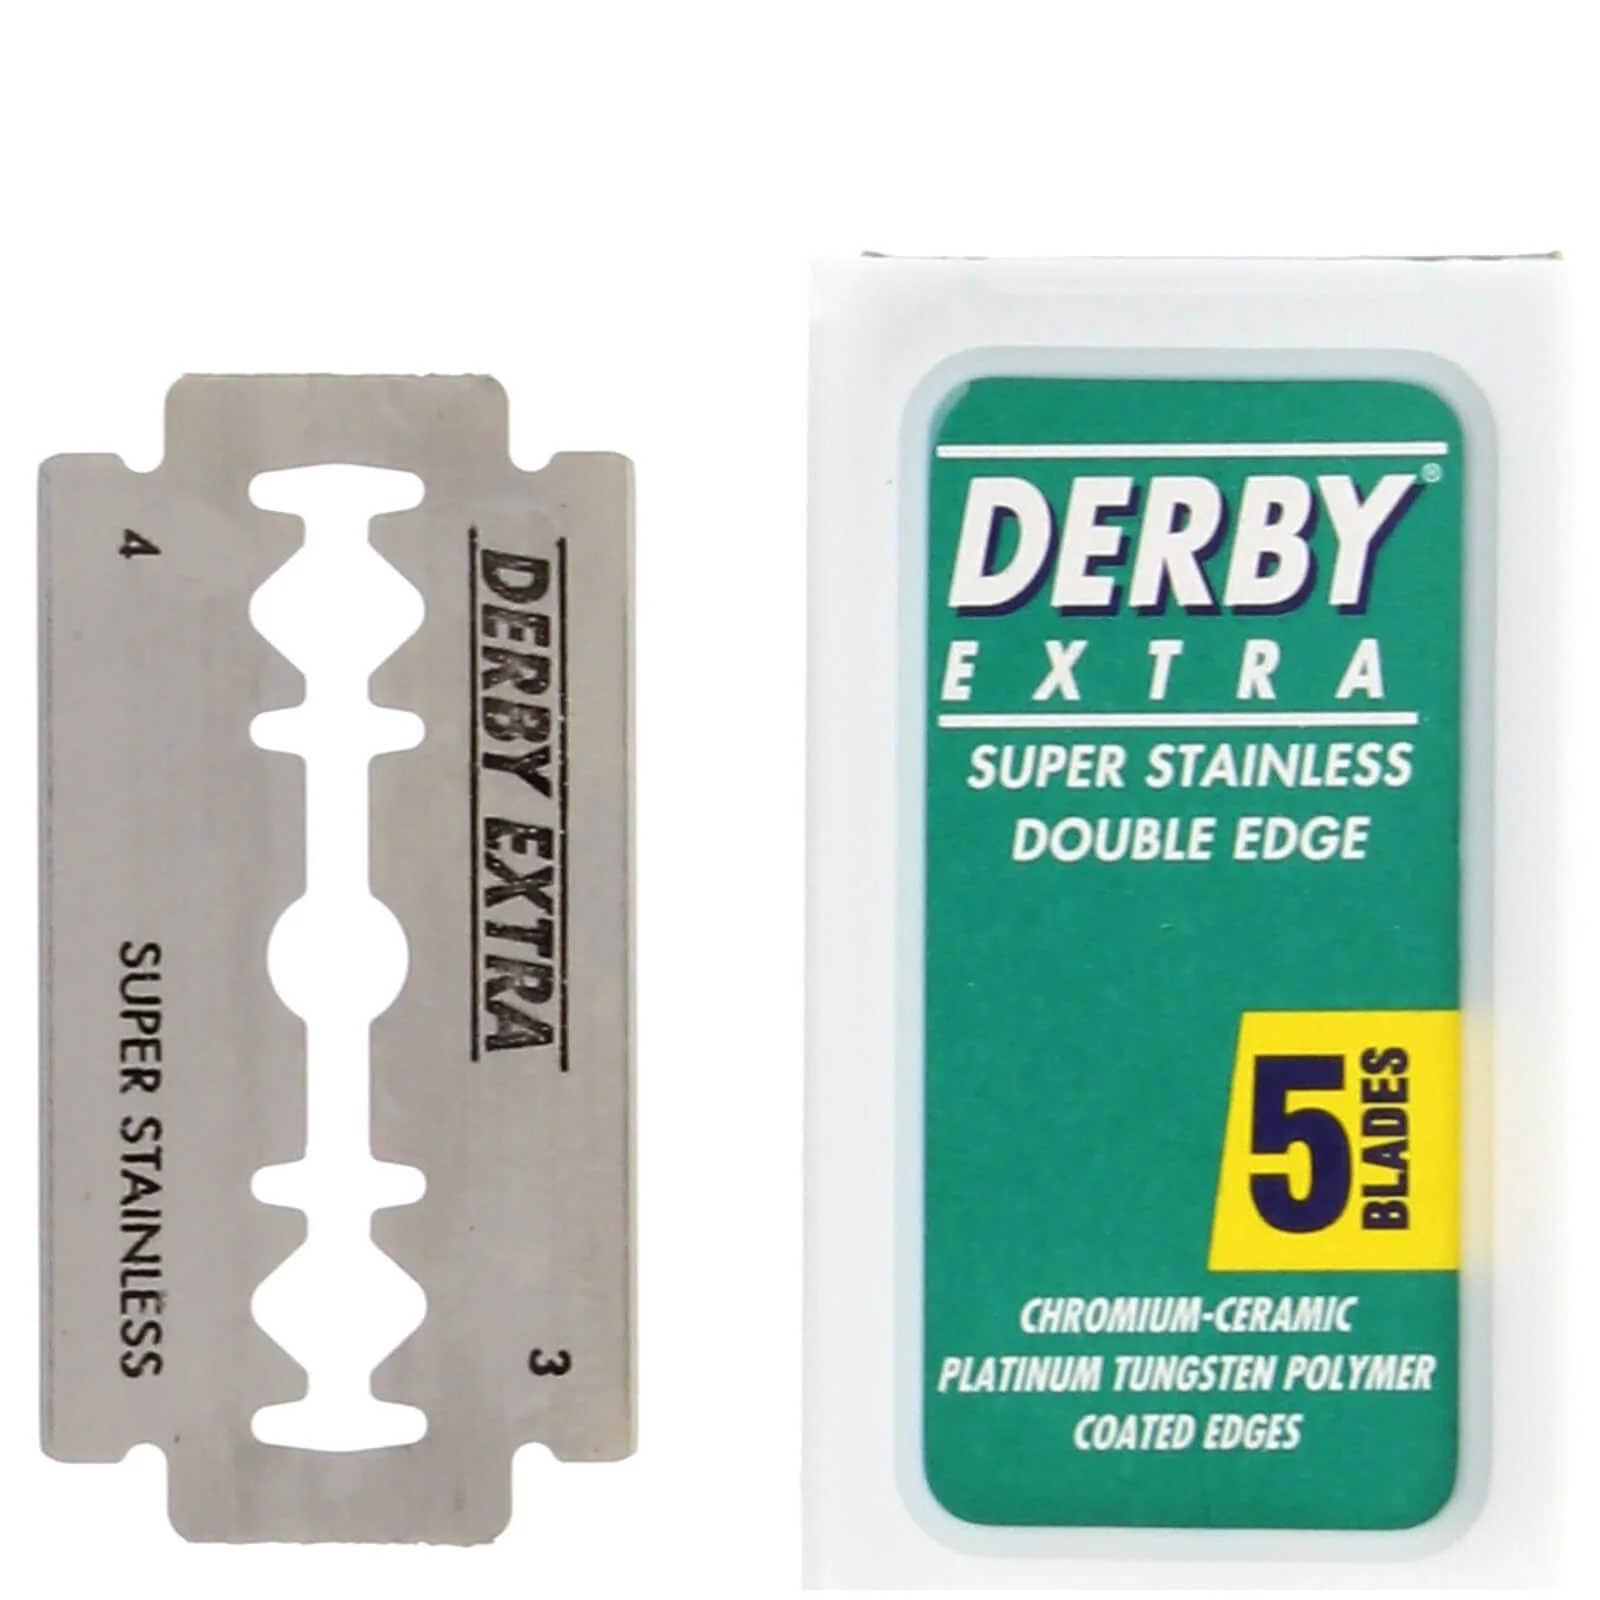 Baxter of California Derby Replacement Blades Image 1